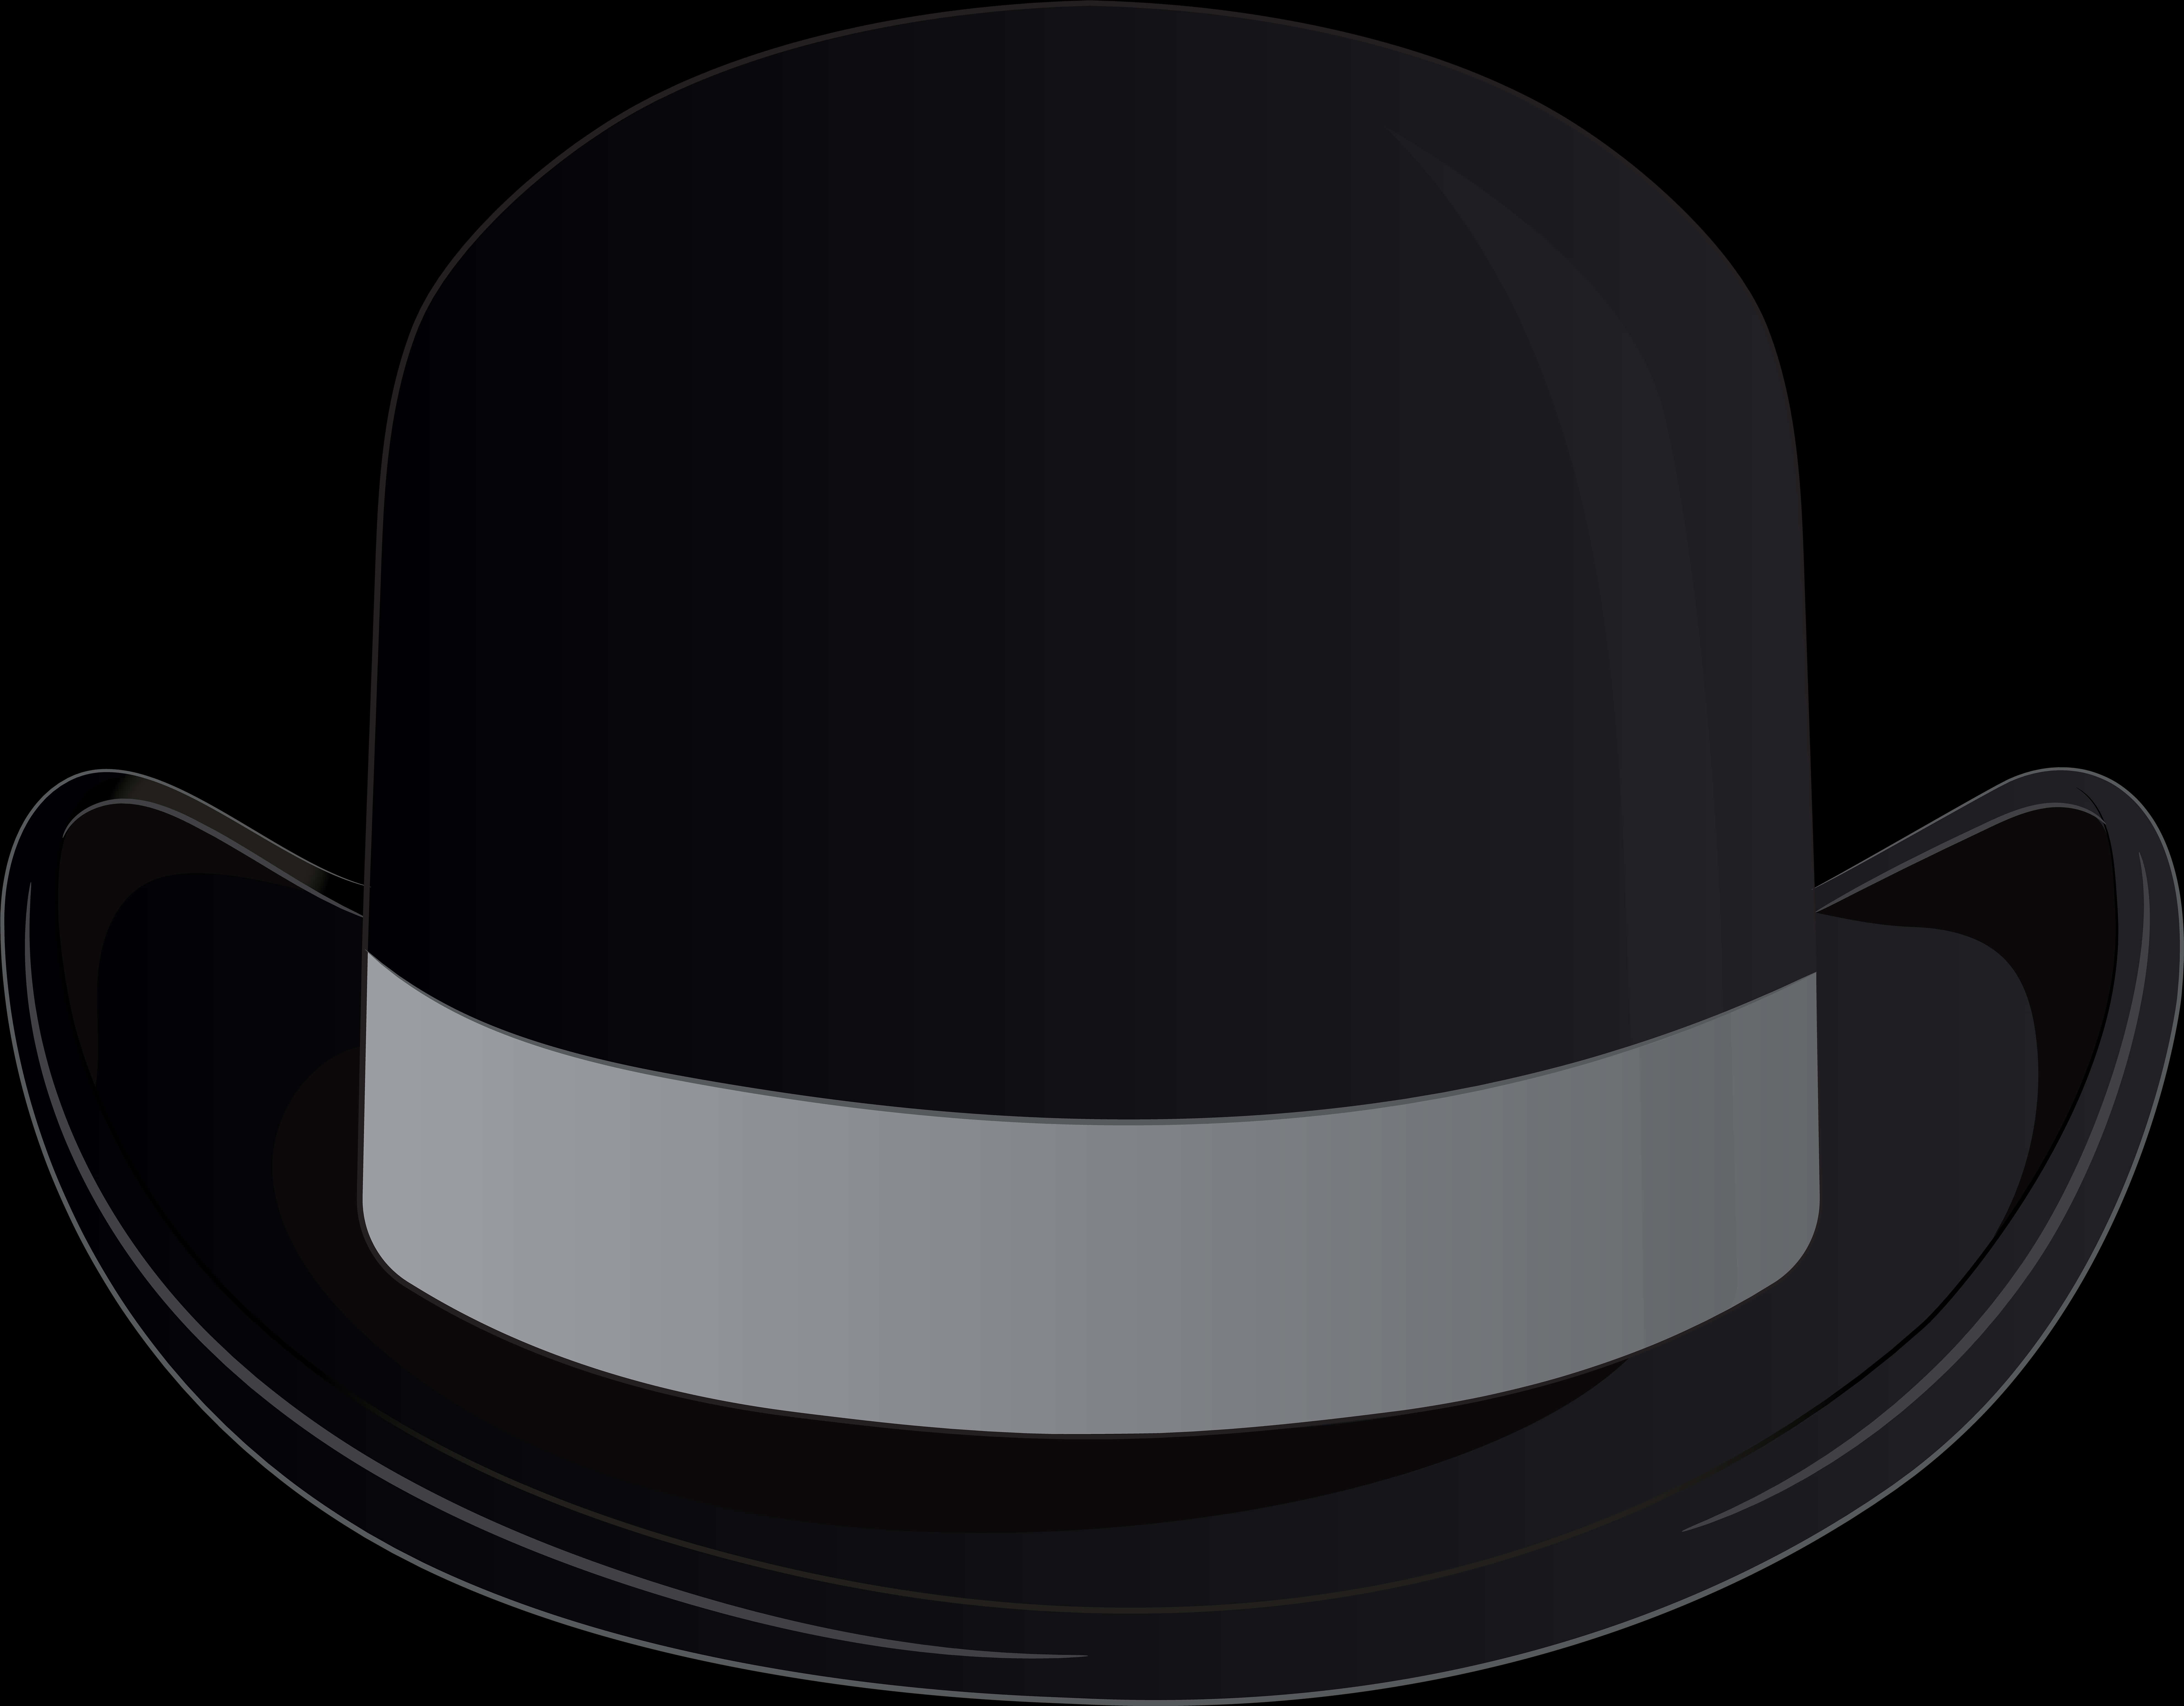 A Black Hat With A White Band